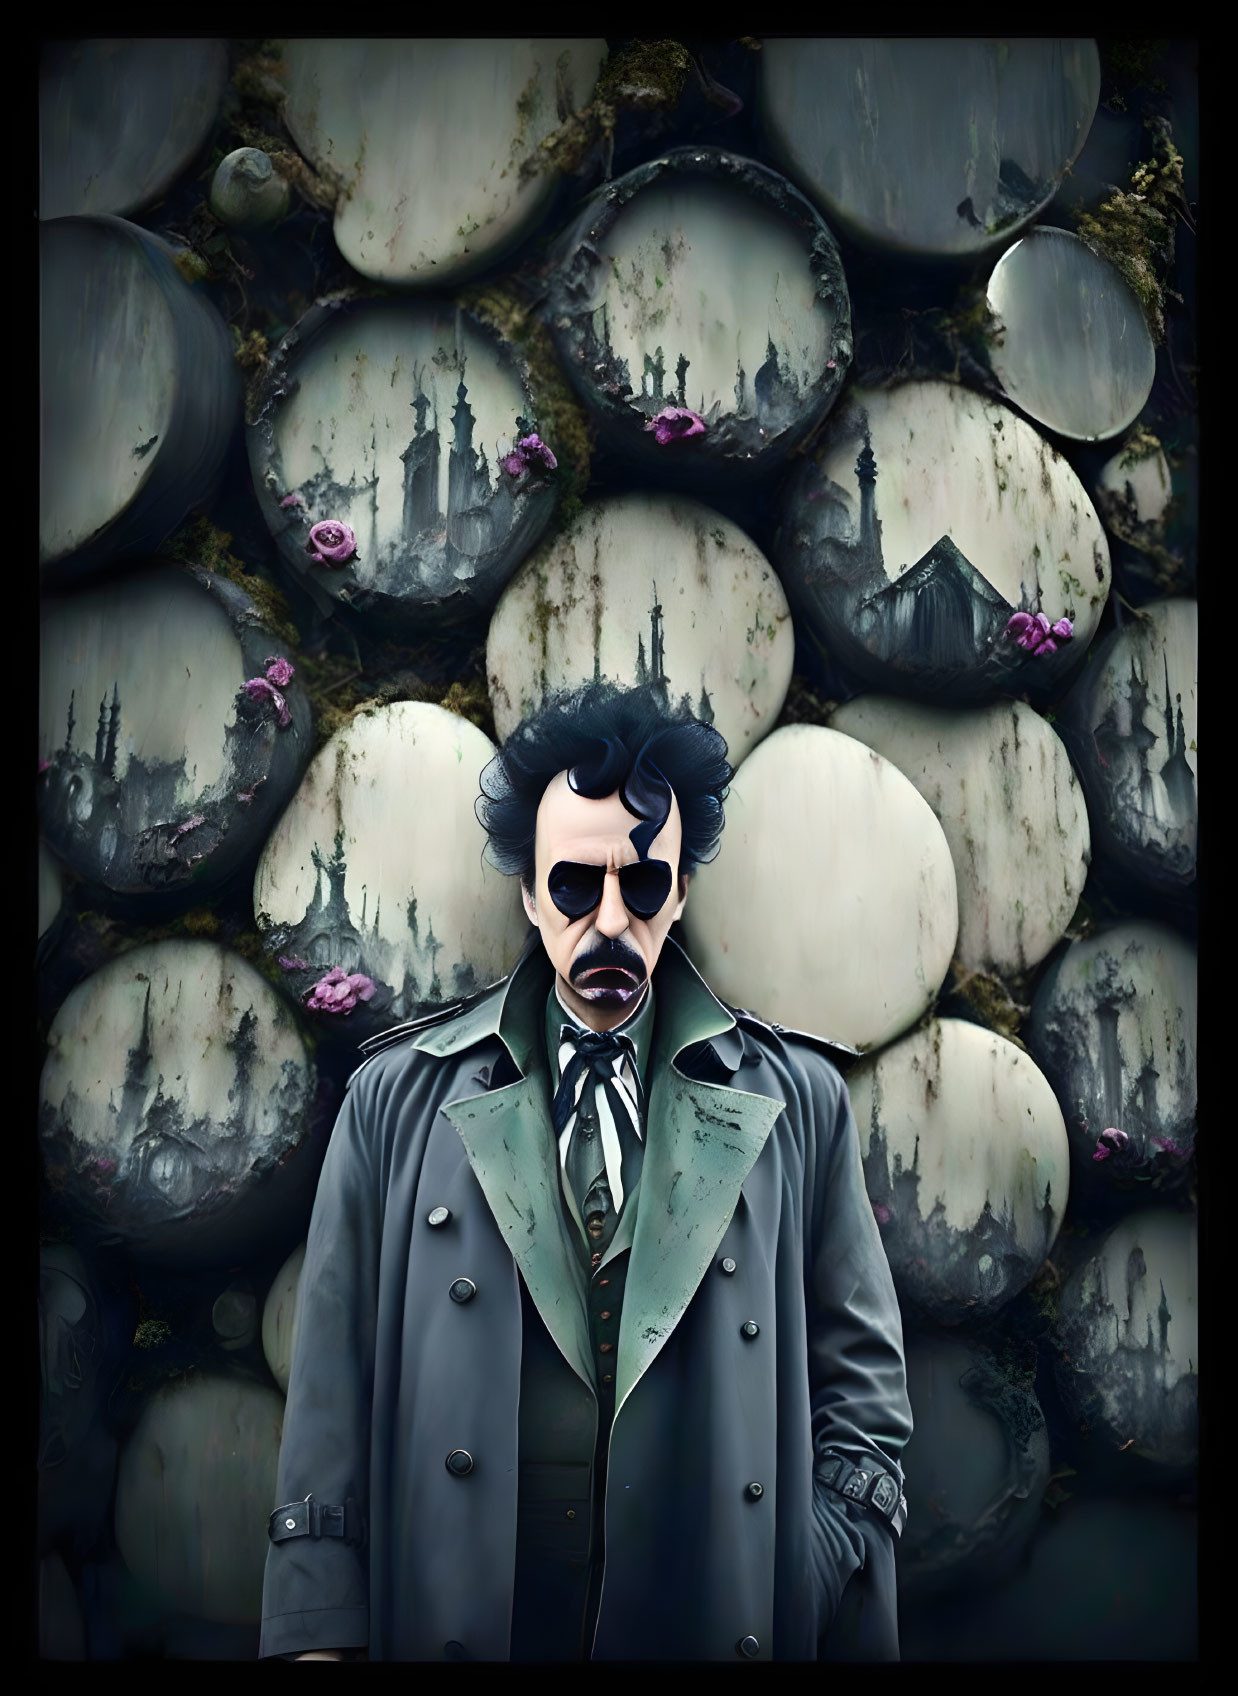 Man with dark mustache and sunglasses in trench coat stands amidst surreal oversized skulls and castles.